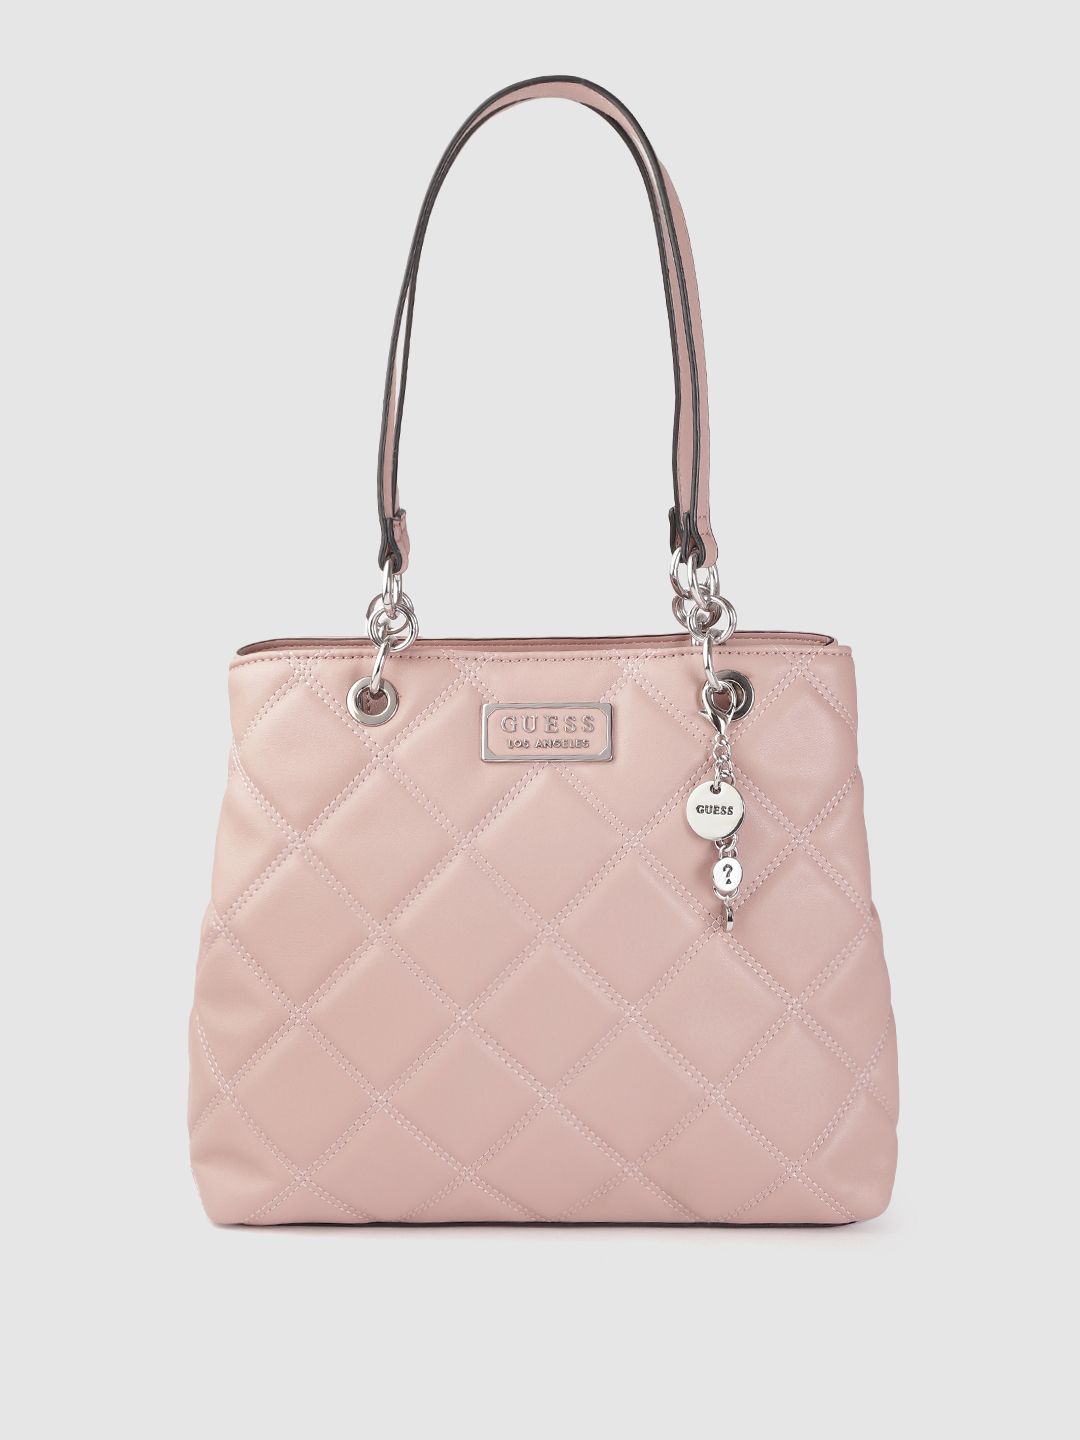 GUESS Pink Quilted Structured Shoulder Bag with Tab & Pouch Price in India